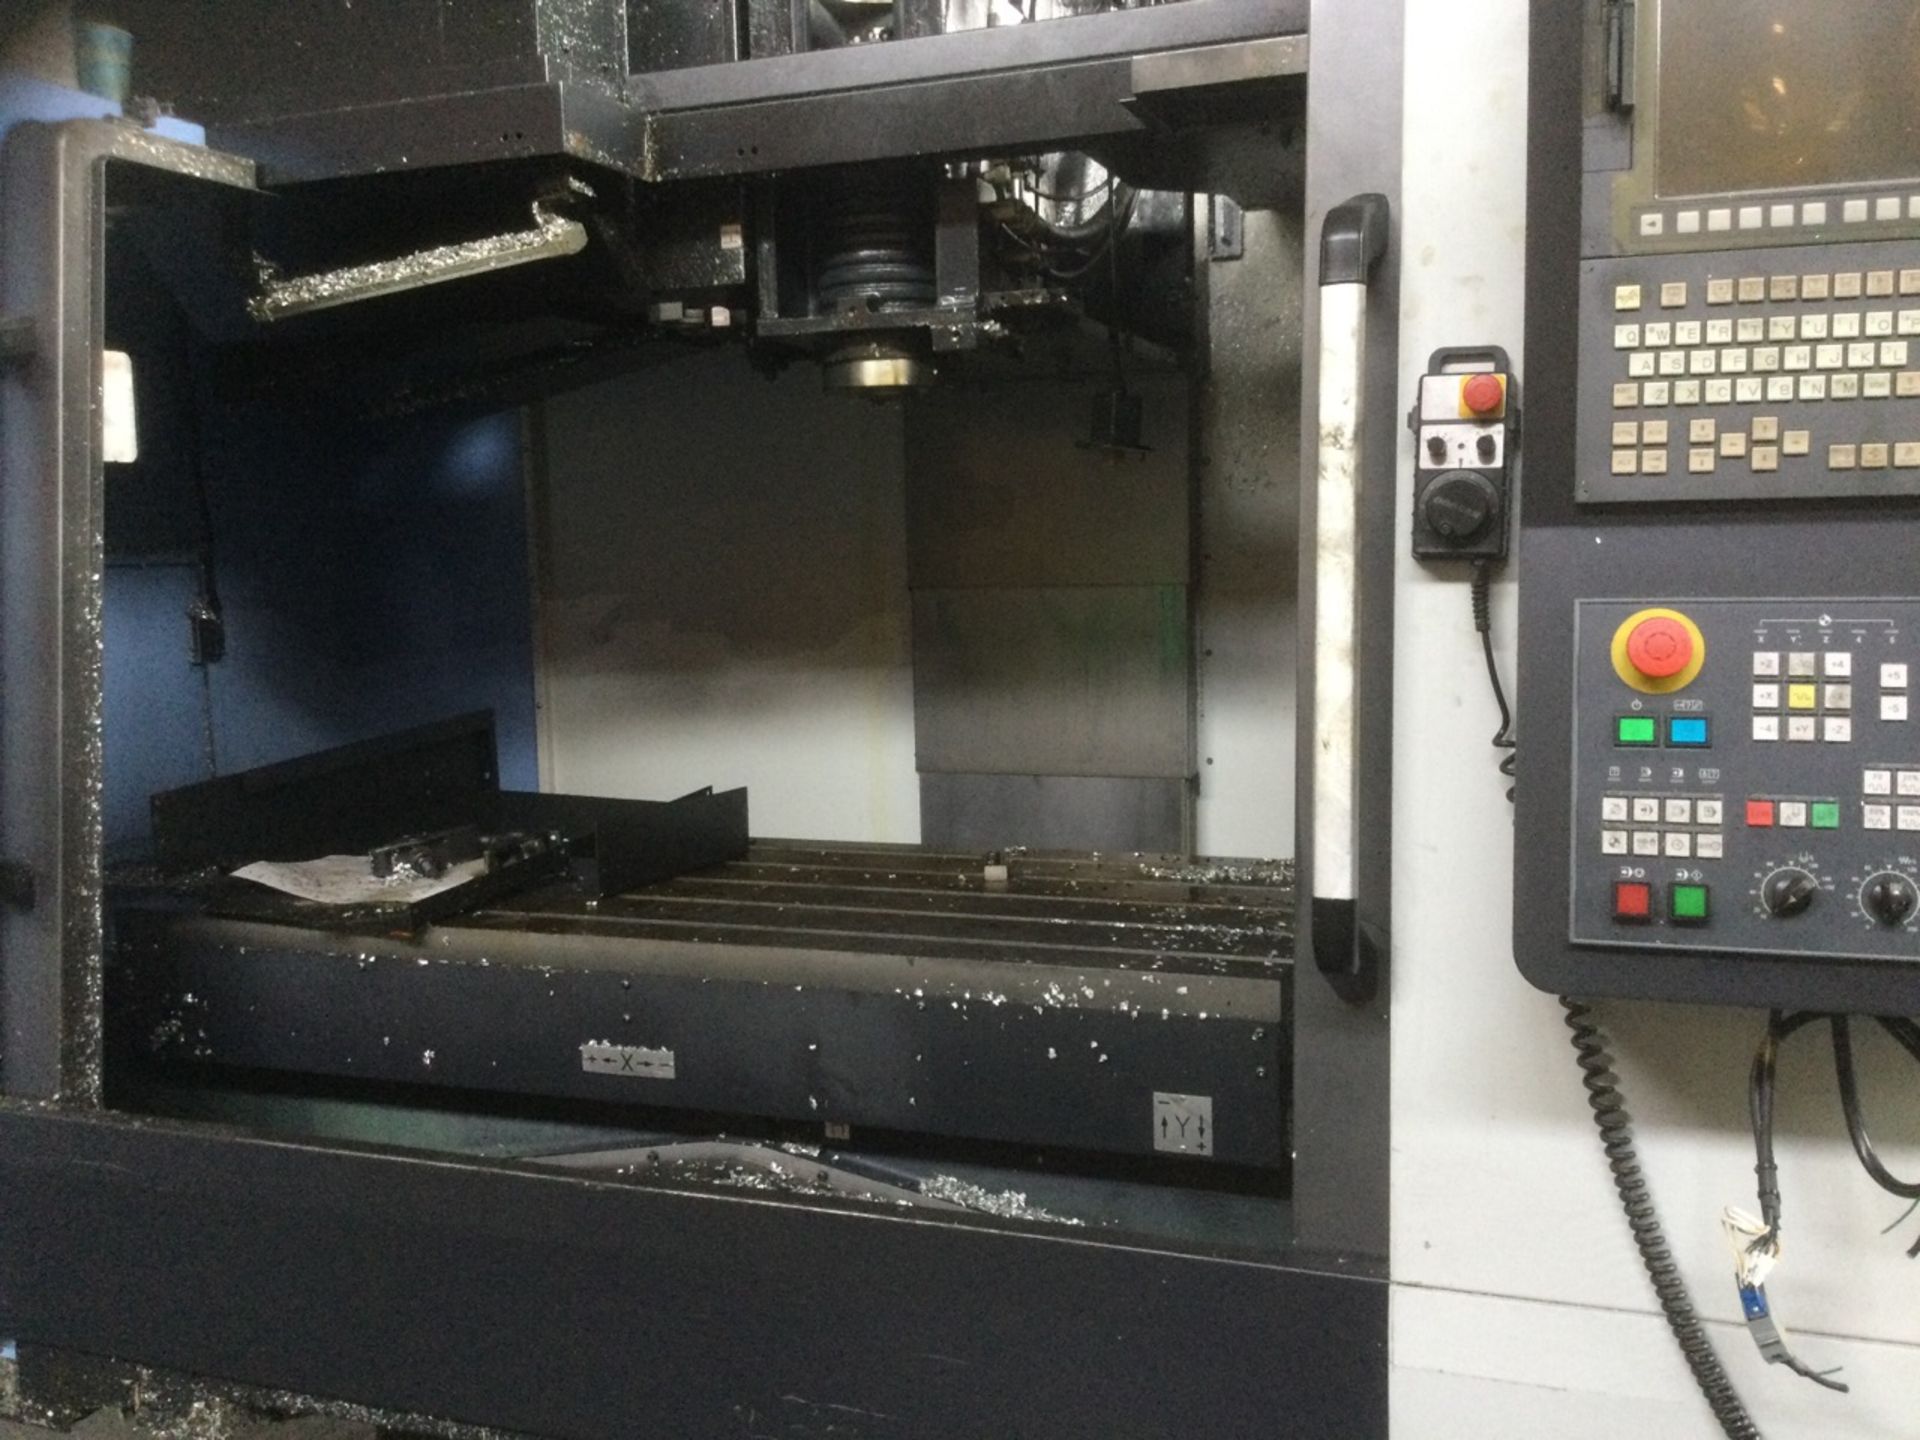 Doosan DNM 6700 3-Axis Vertical Machining Centre With Fanuc I-Series Control - Image 2 of 4